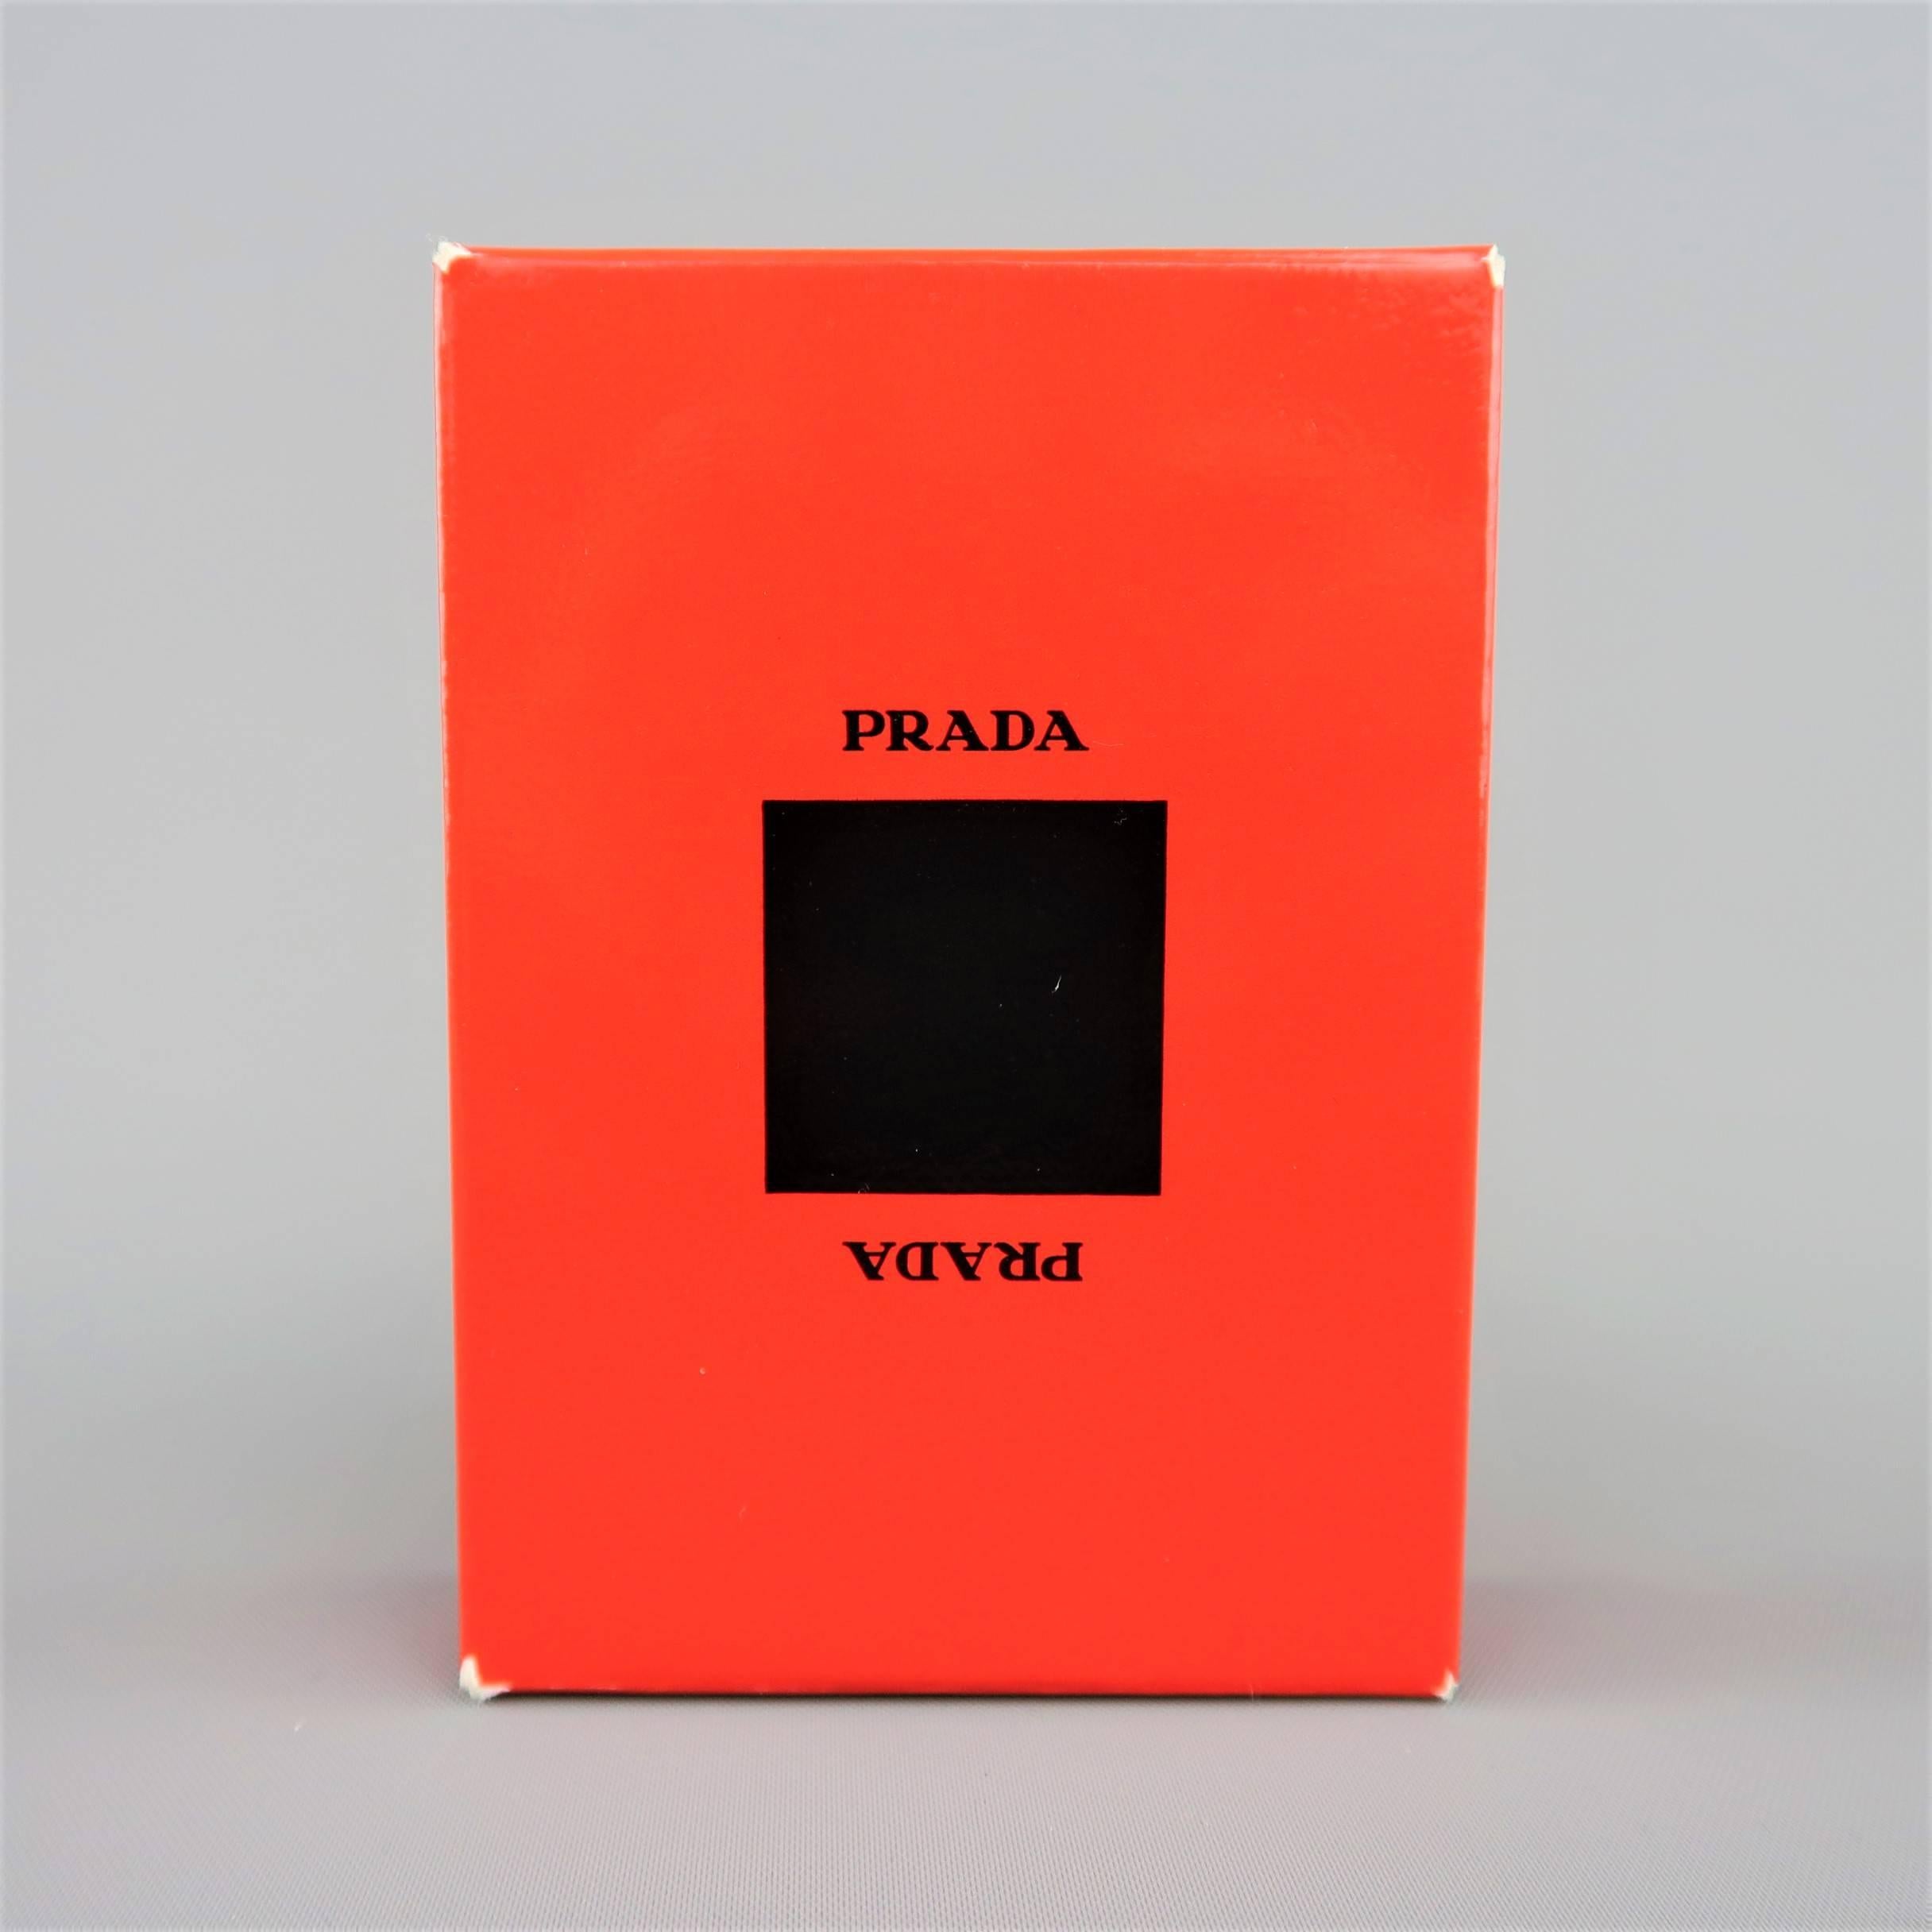 PRADA playing cards come sealed in a bold red logo case with original box. Come minor wear on corners of box from storage. As-Is. Made in Italy.
 
New in Box.
 
2.5 x 3.5 in.


SKU: 85382